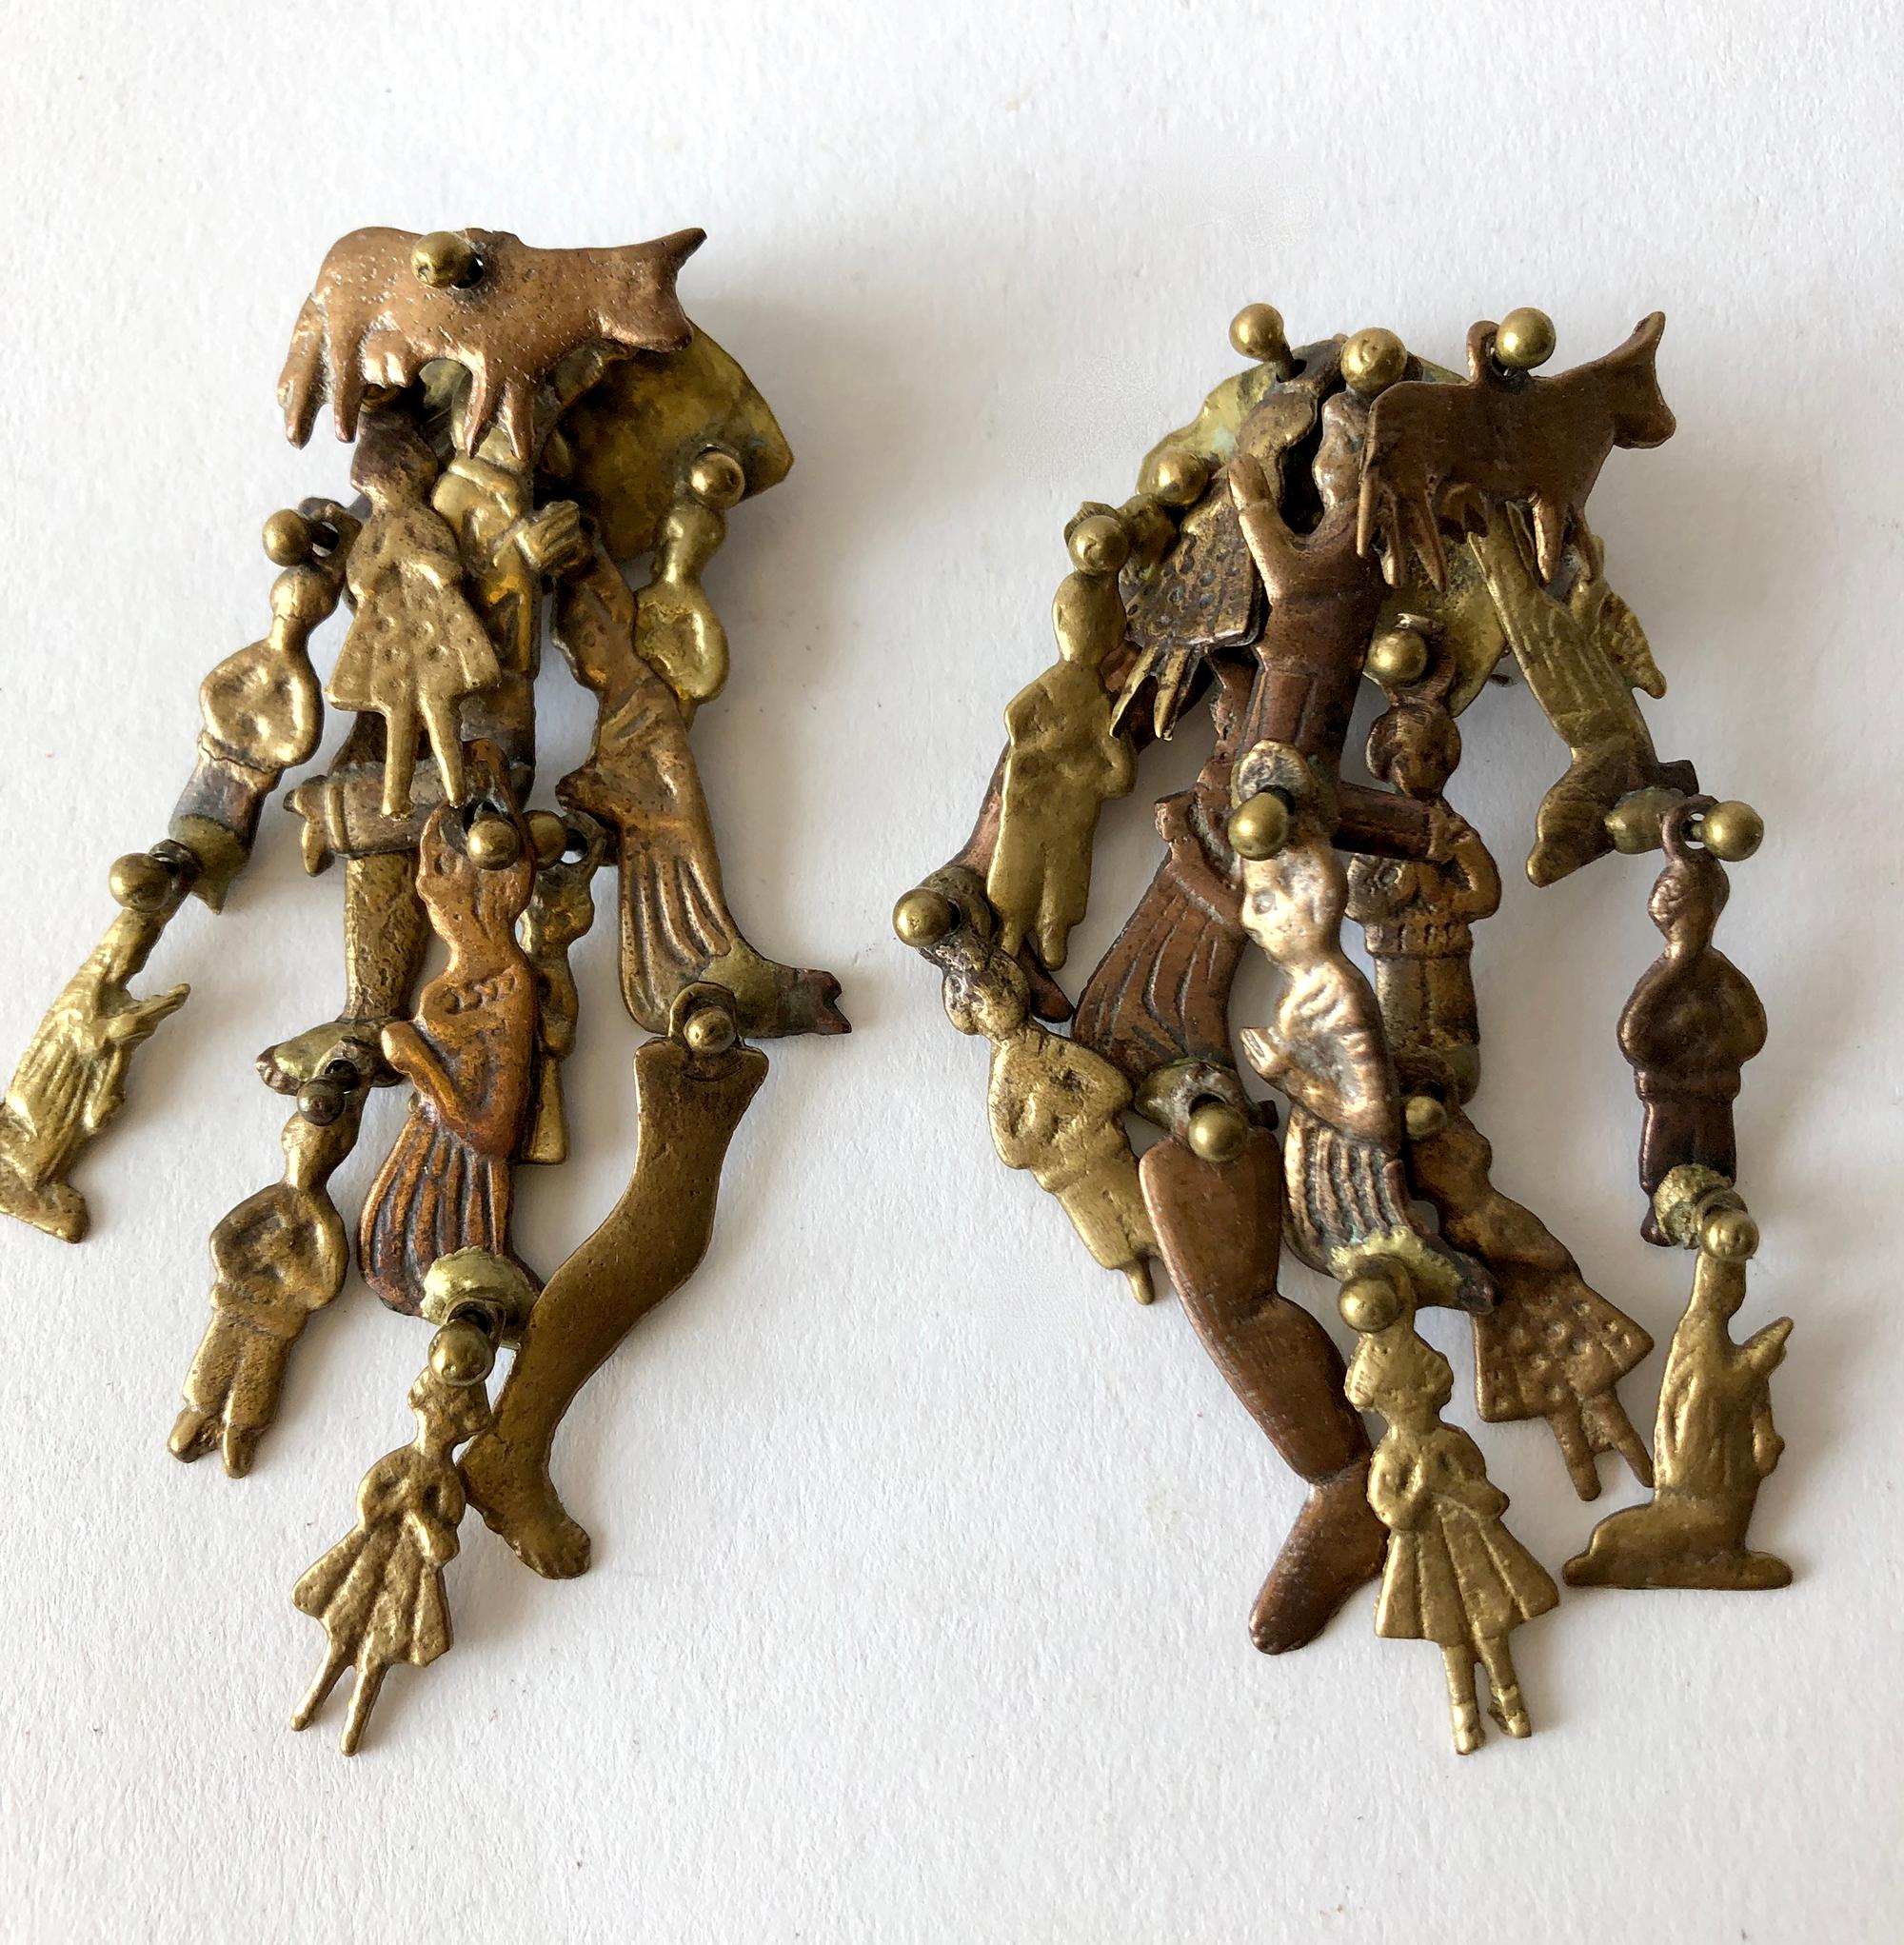 Bronze milagros dangling earrings created by Pal Kepenyes of Acapulco, Mexico.  Earrings measure 3.75